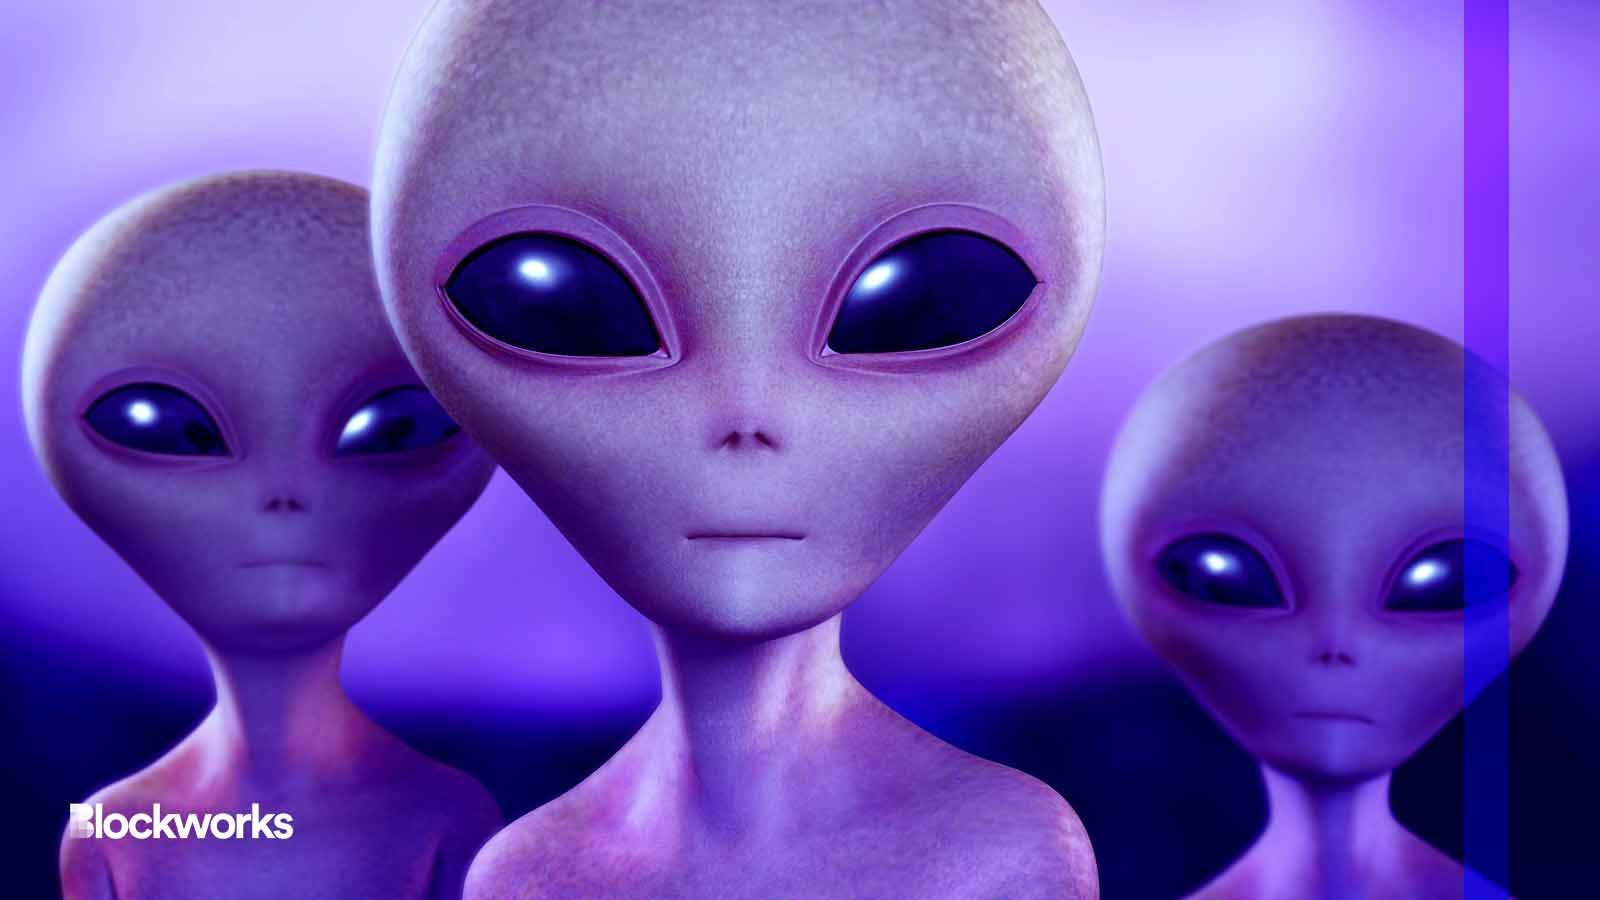 Blockchain is being used to store simulated alien messages from Mars